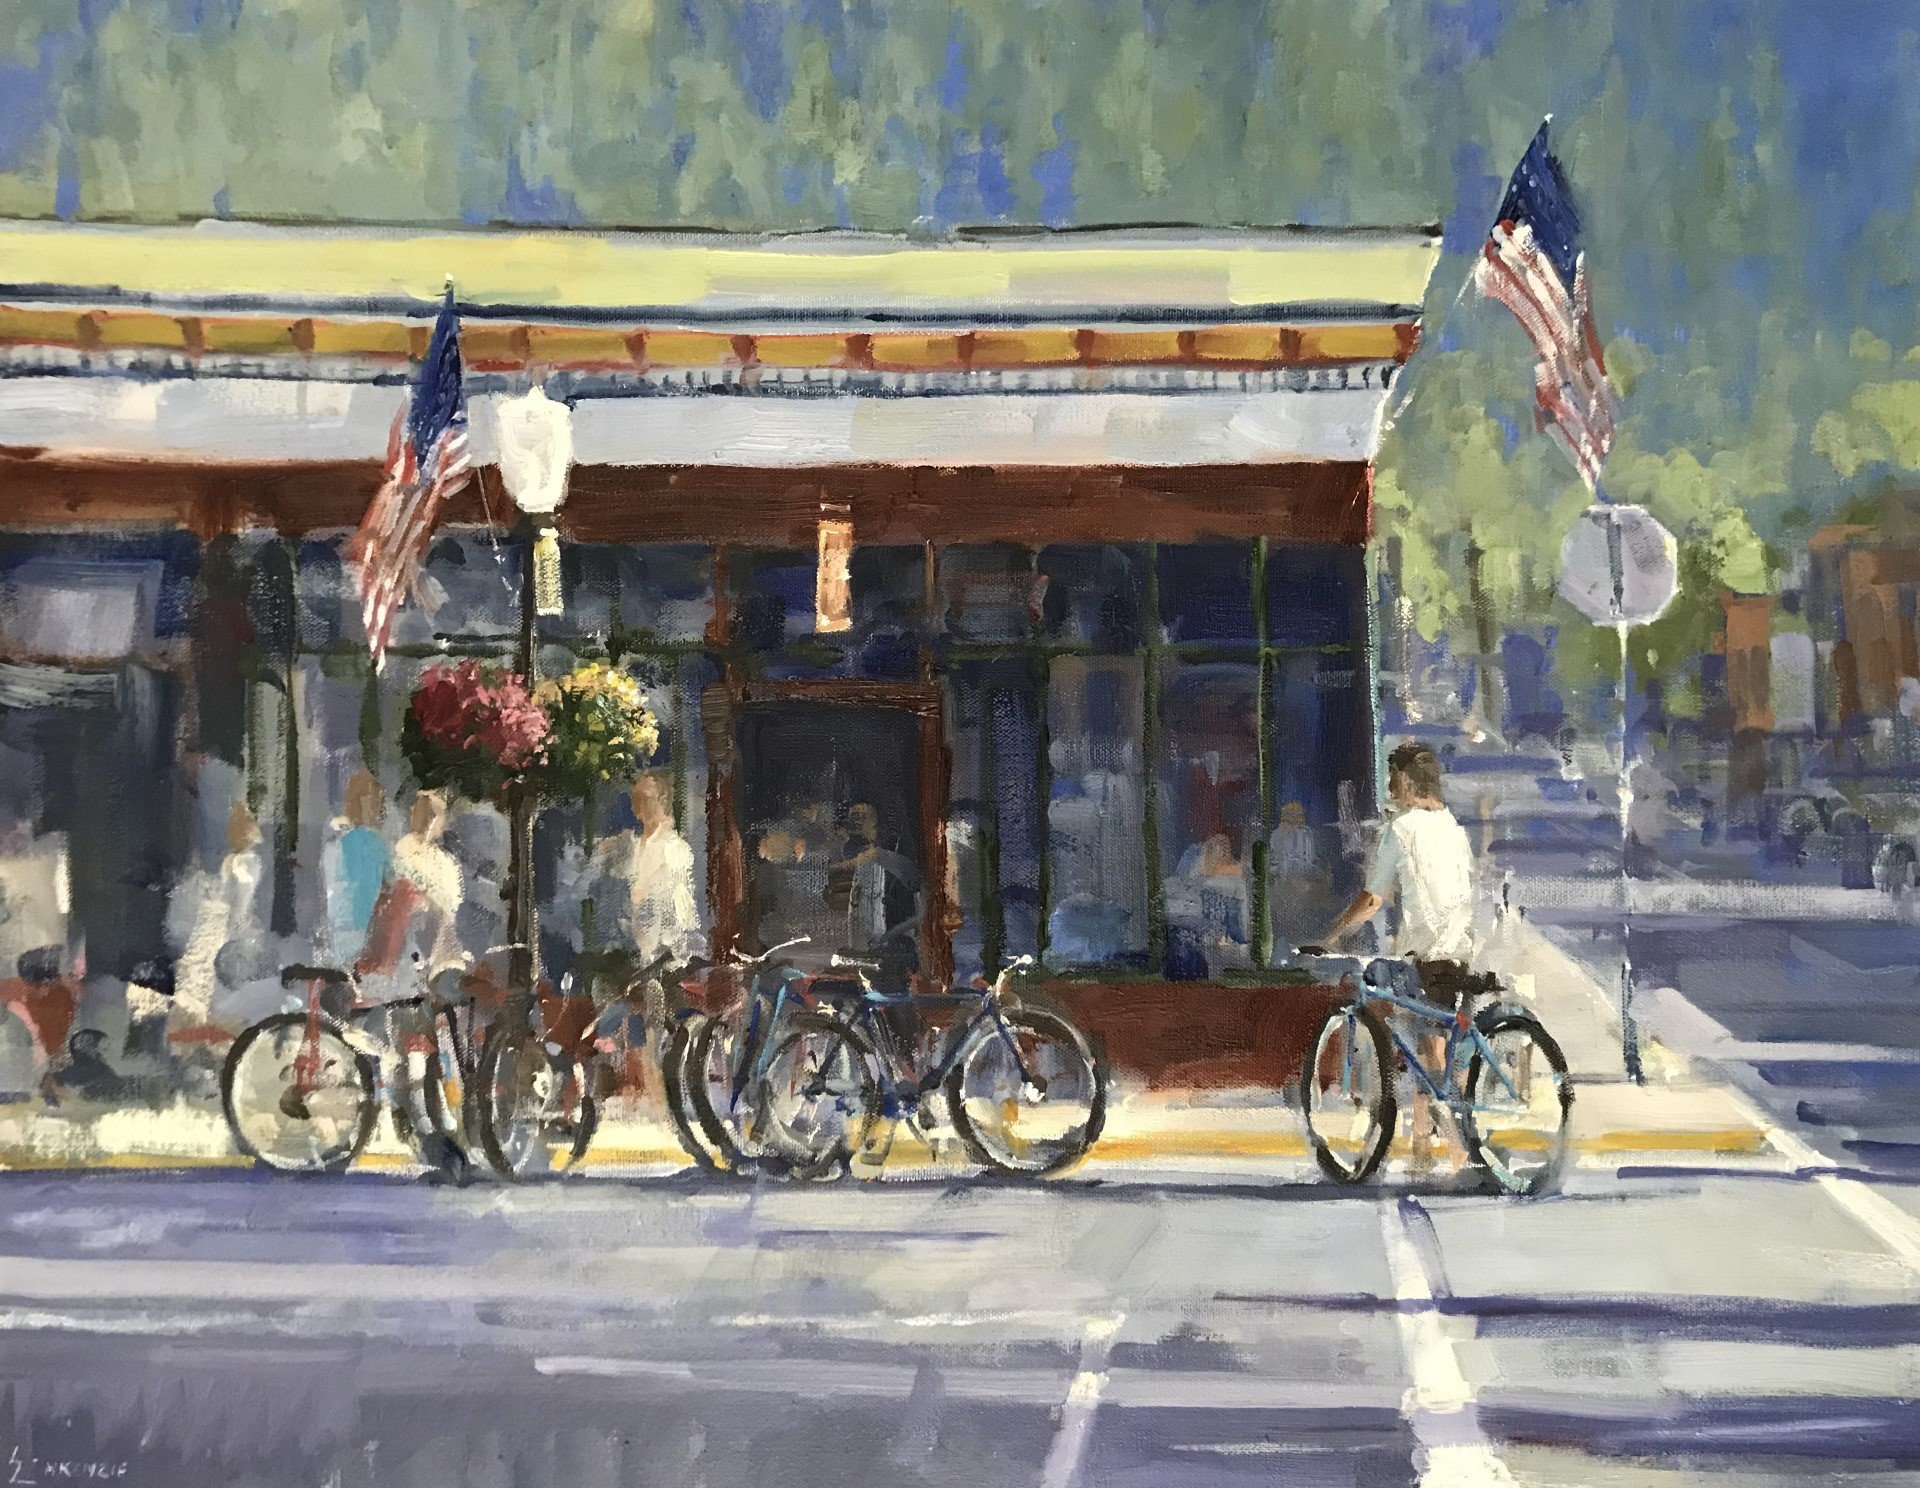  “Bikes and Brews” 22x28, Oil on Canvas. 